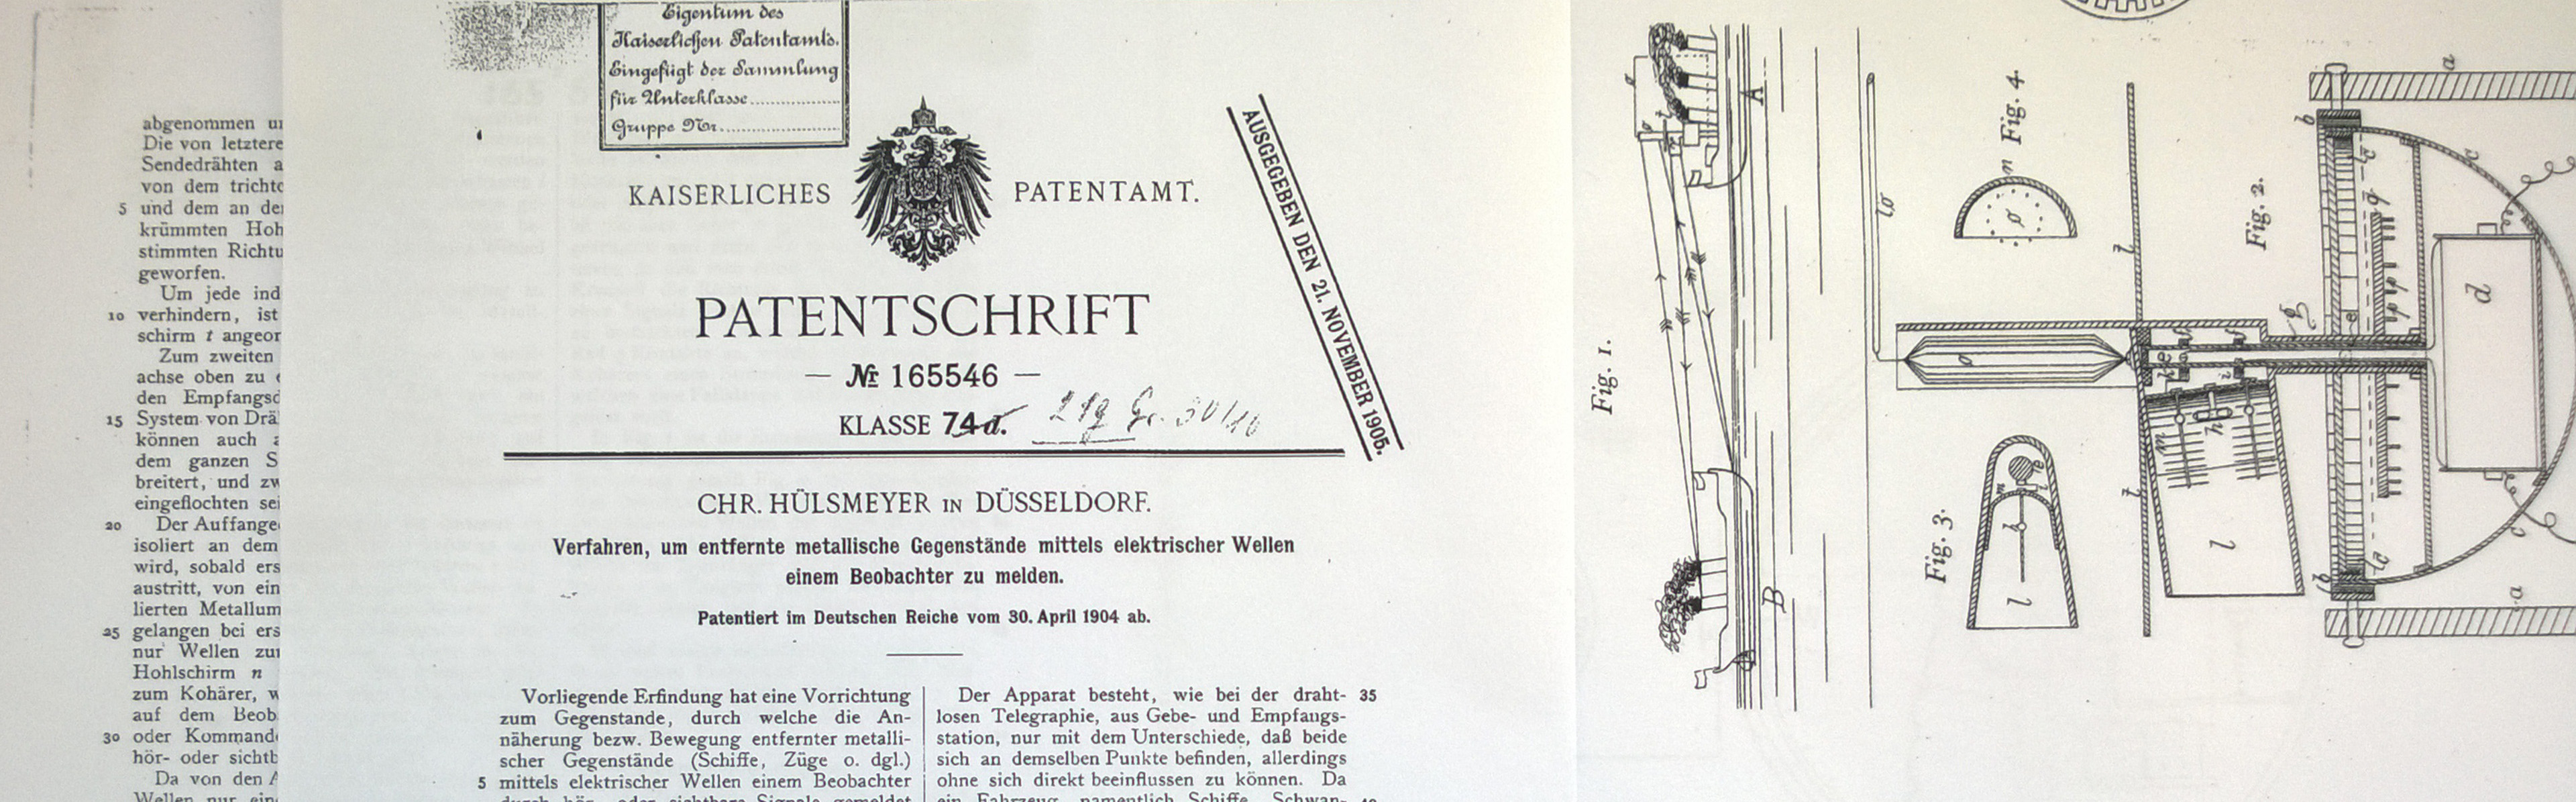 On 30 April 1904, Christian Hülsmeyer patented his invention.